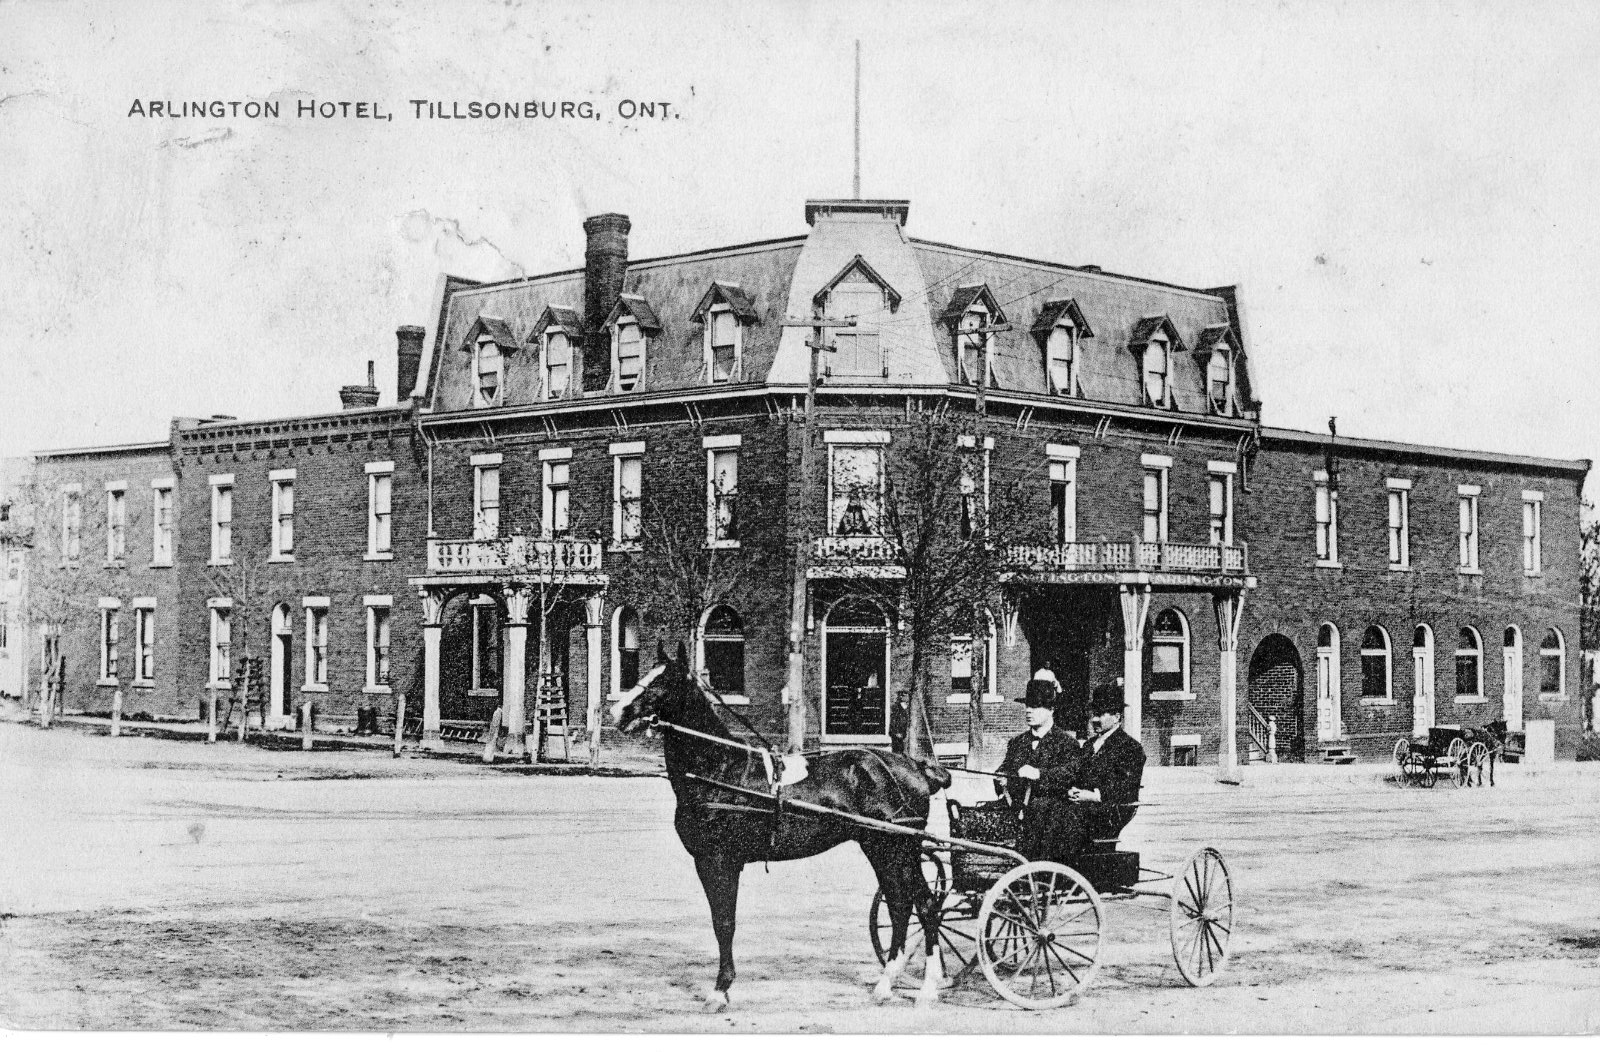 Postcard featuring the Arlington Hotel in Tillsonburg. Two men in a horse-drawn buggy are sitting outside of the hotel in the foreground. Arlington Hotel is a large brick building with a with a mansard style roof.